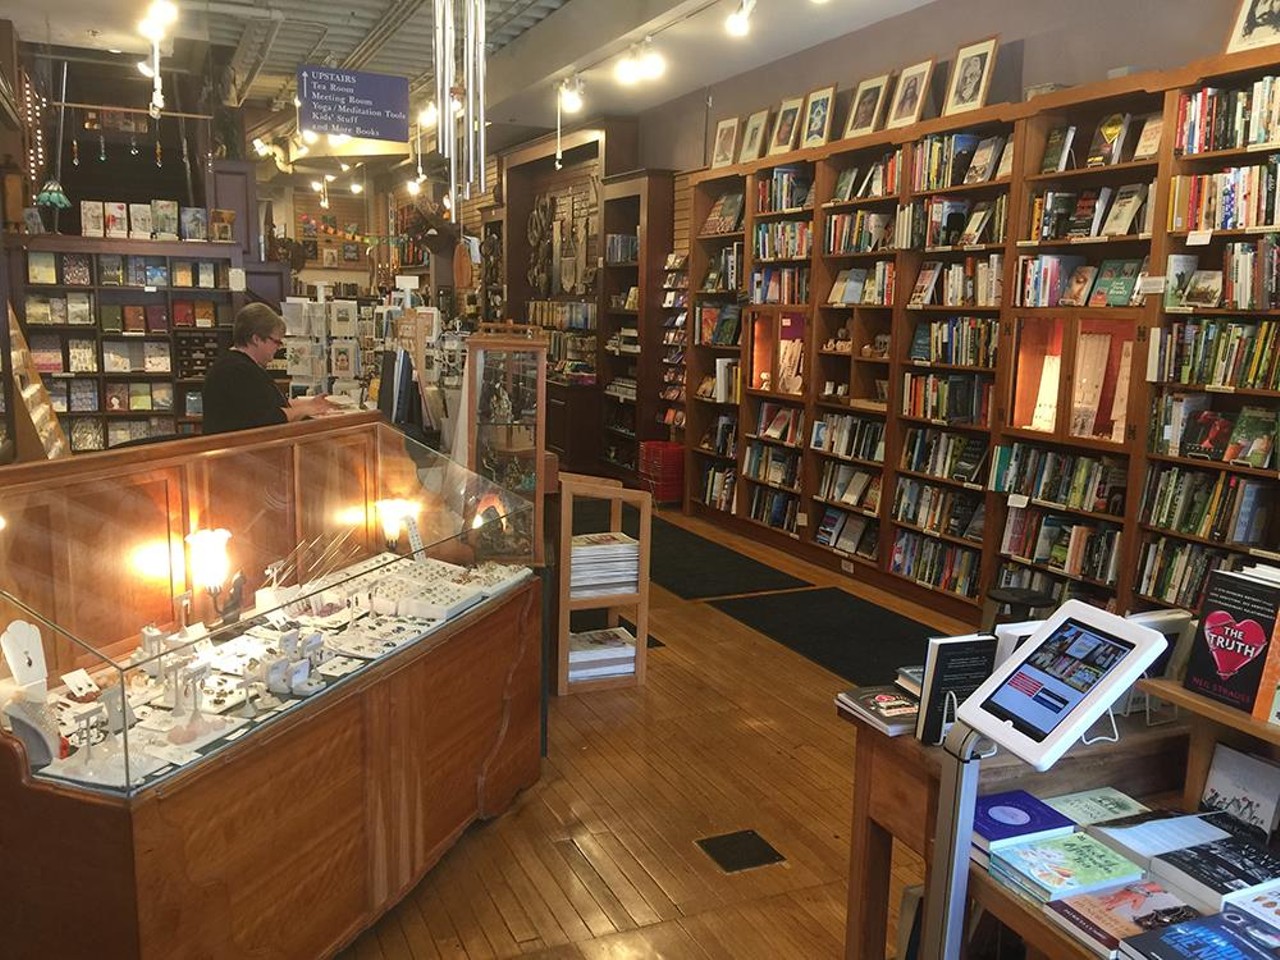 Crazy Wisdom Bookstore and Tearoom   
114 S. Main St., Ann Arbor, 734-665-2757, Open 10 a.m. to 11 p.m.
Another Ann Arbor book stop, Crazy Wisdom has been locally owned and independent since 1982. Crazy Wisdom specializes in the subjects of holistic health, body, mind therapies, psychology, Buddhism, alternative spiritual practices, spiritual development, and consciousness. Tea is always available in the Tea Room &#151; try their April Drink Specials for soothing seasonal sipping.
Photo via  Facebook 